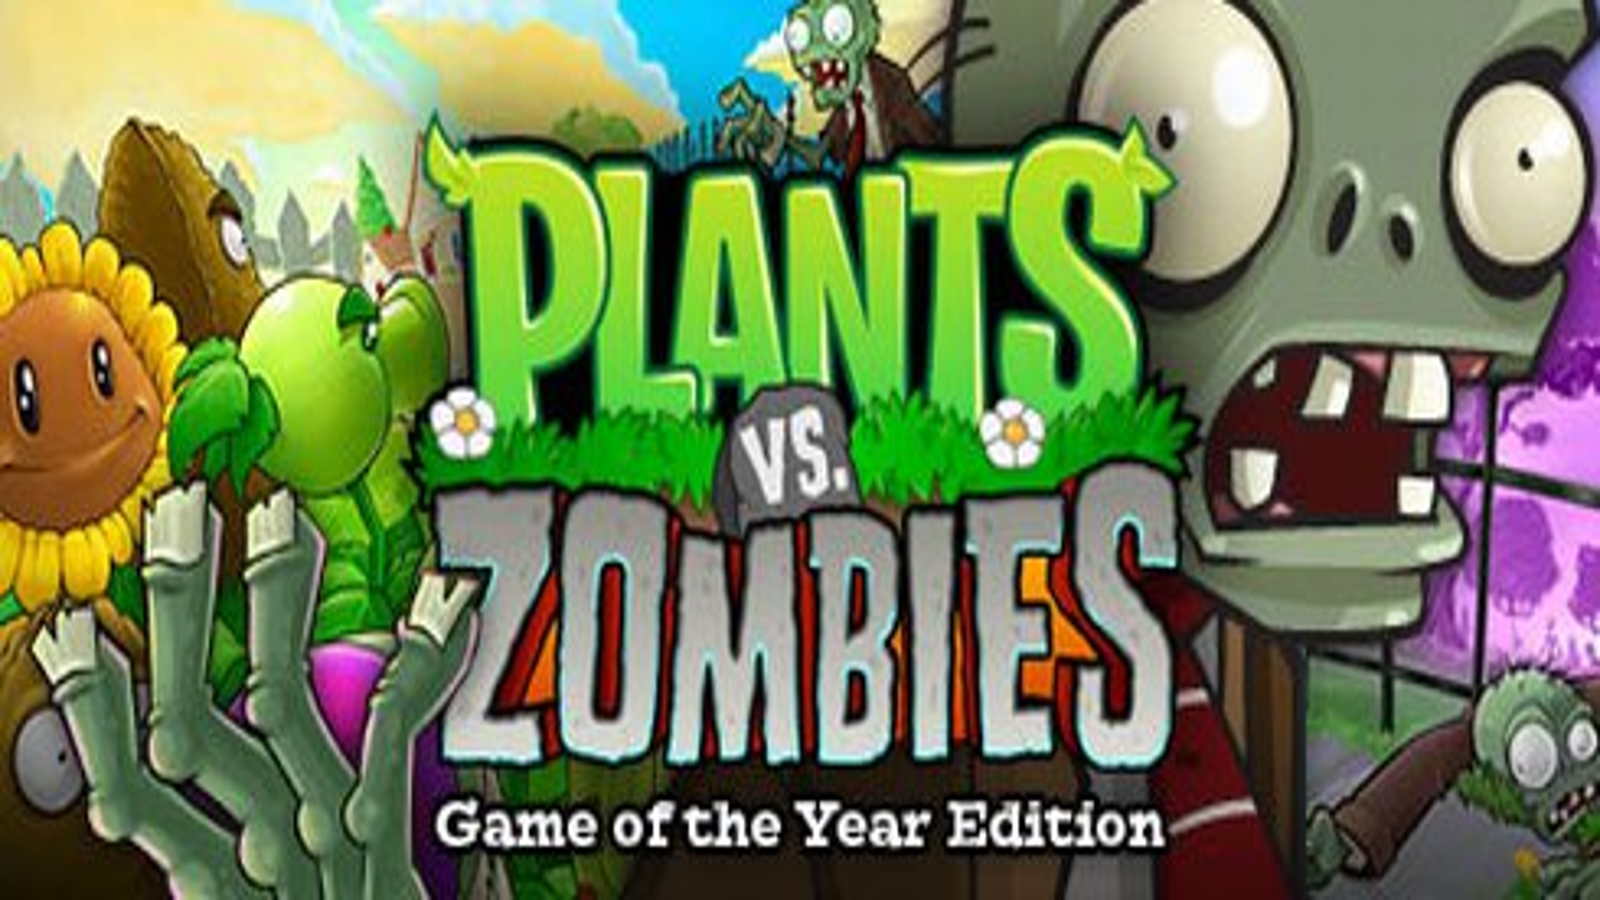 Steam Community :: Plants vs. Zombies: Game of the Year